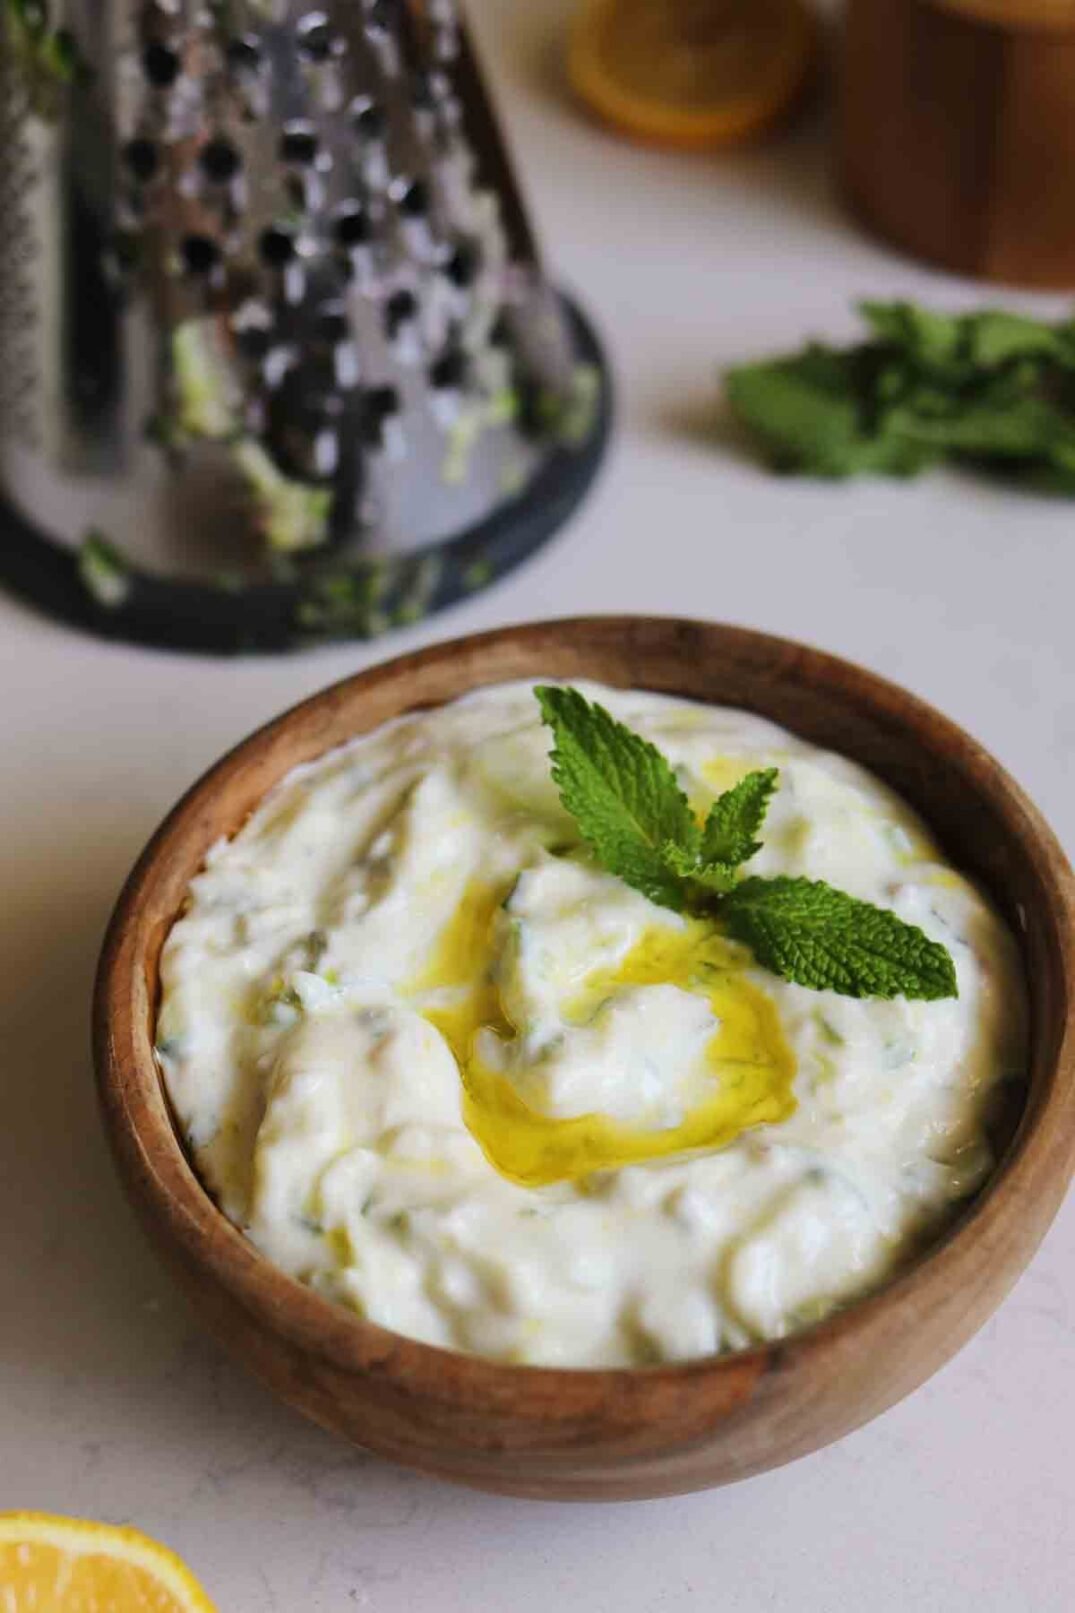 white tzatziki sauce in a brown bowl with a grater in the background.